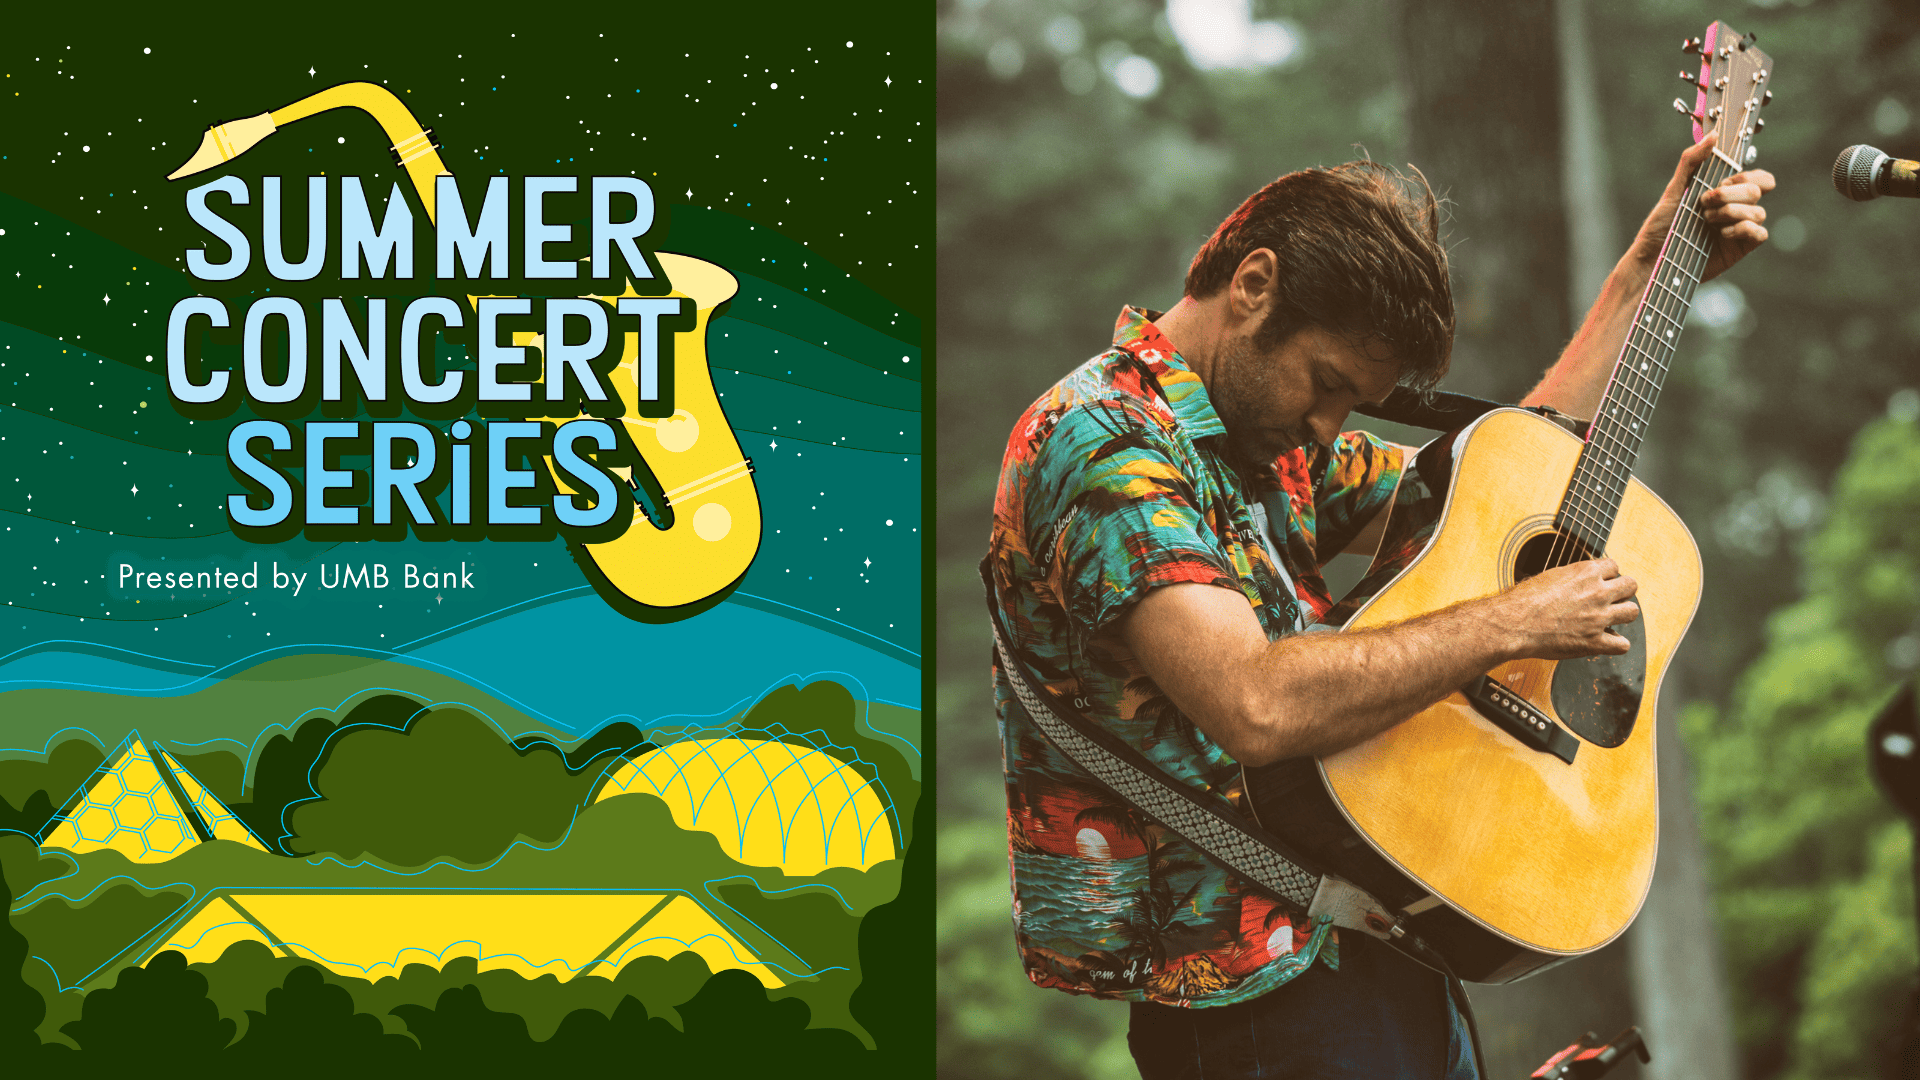 John Craigie, one of the artists in the 2024 Denver Botanic Gardens Summer Concert Series, playing an acoustic guitar and singing into a microphone with his eyes closed and a harmonica around his neck